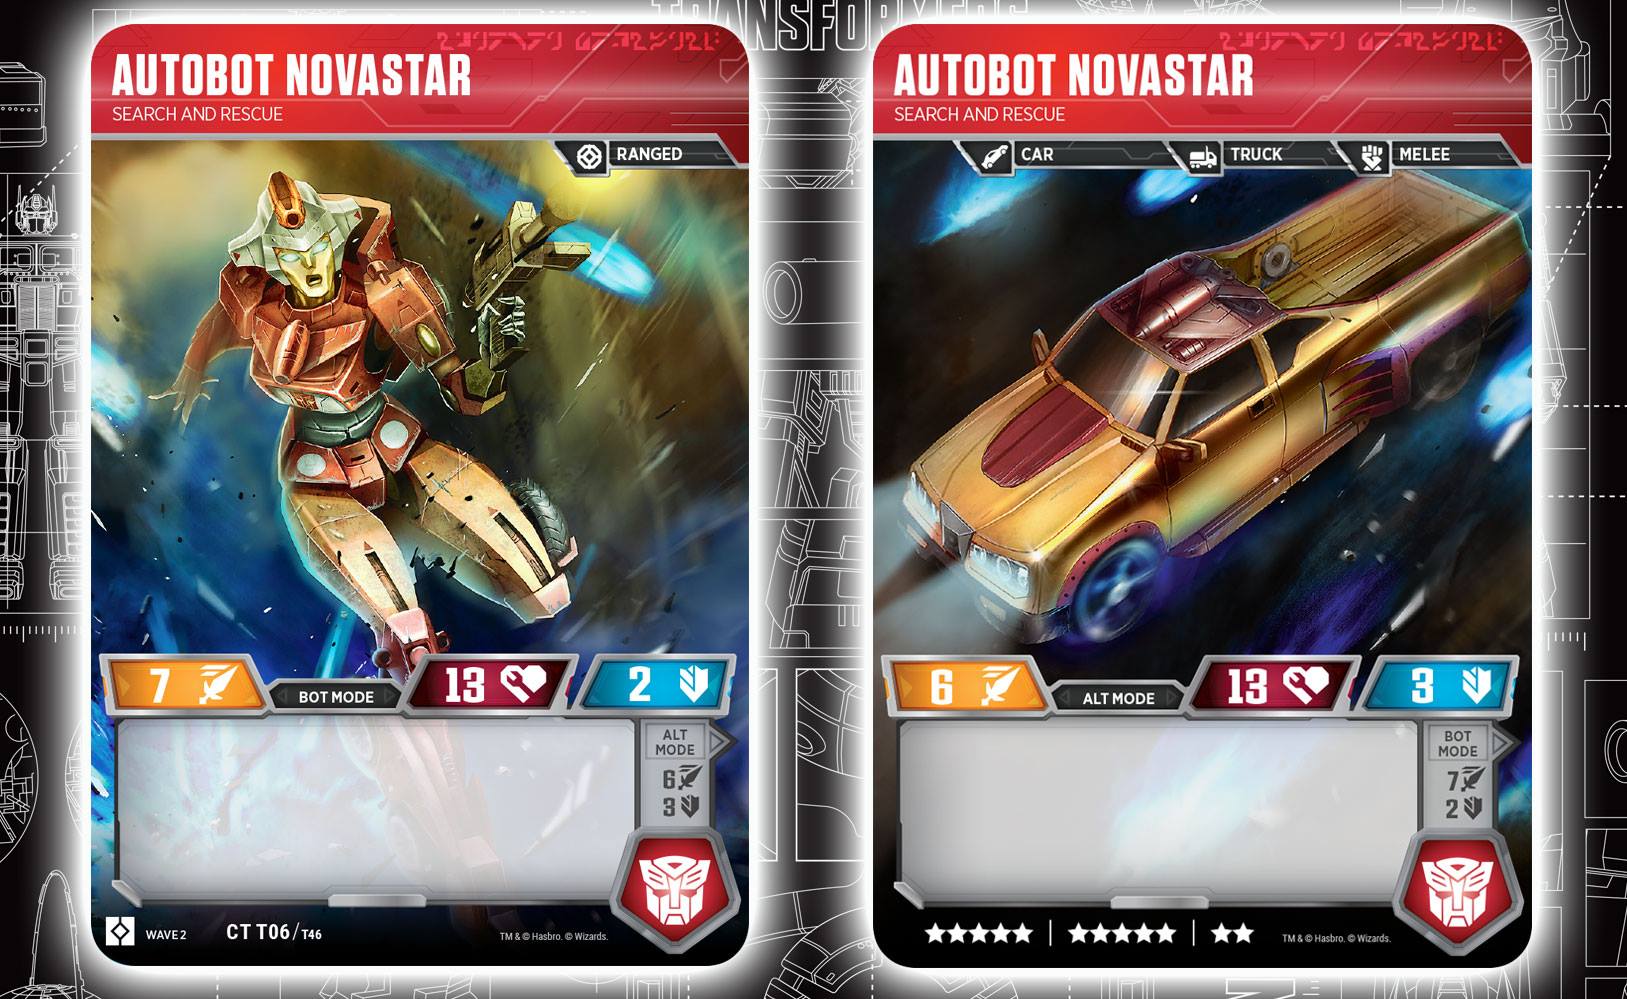 Autobot Novastar, Search and Rescue